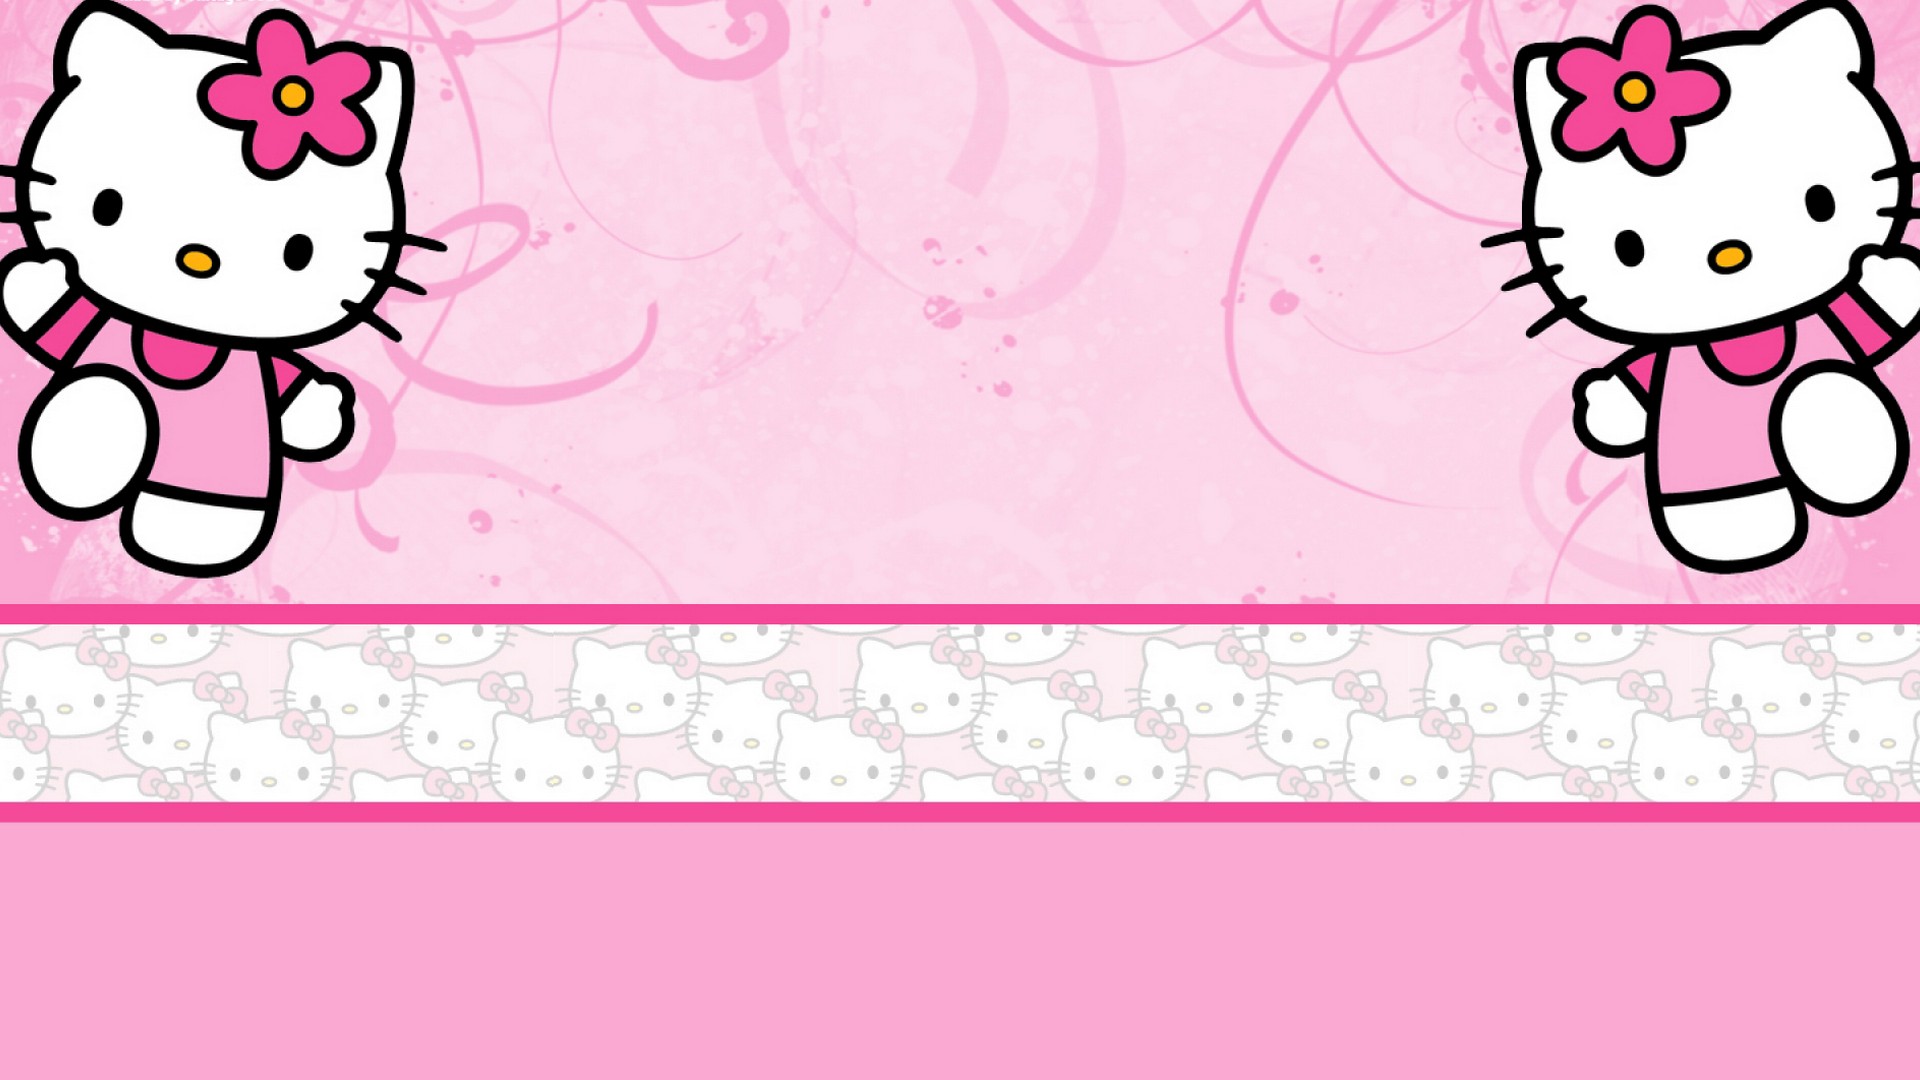 Hello Kitty Characters Wallpaper For Desktop with image resolution 1920x1080 pixel. You can use this wallpaper as background for your desktop Computer Screensavers, Android or iPhone smartphones